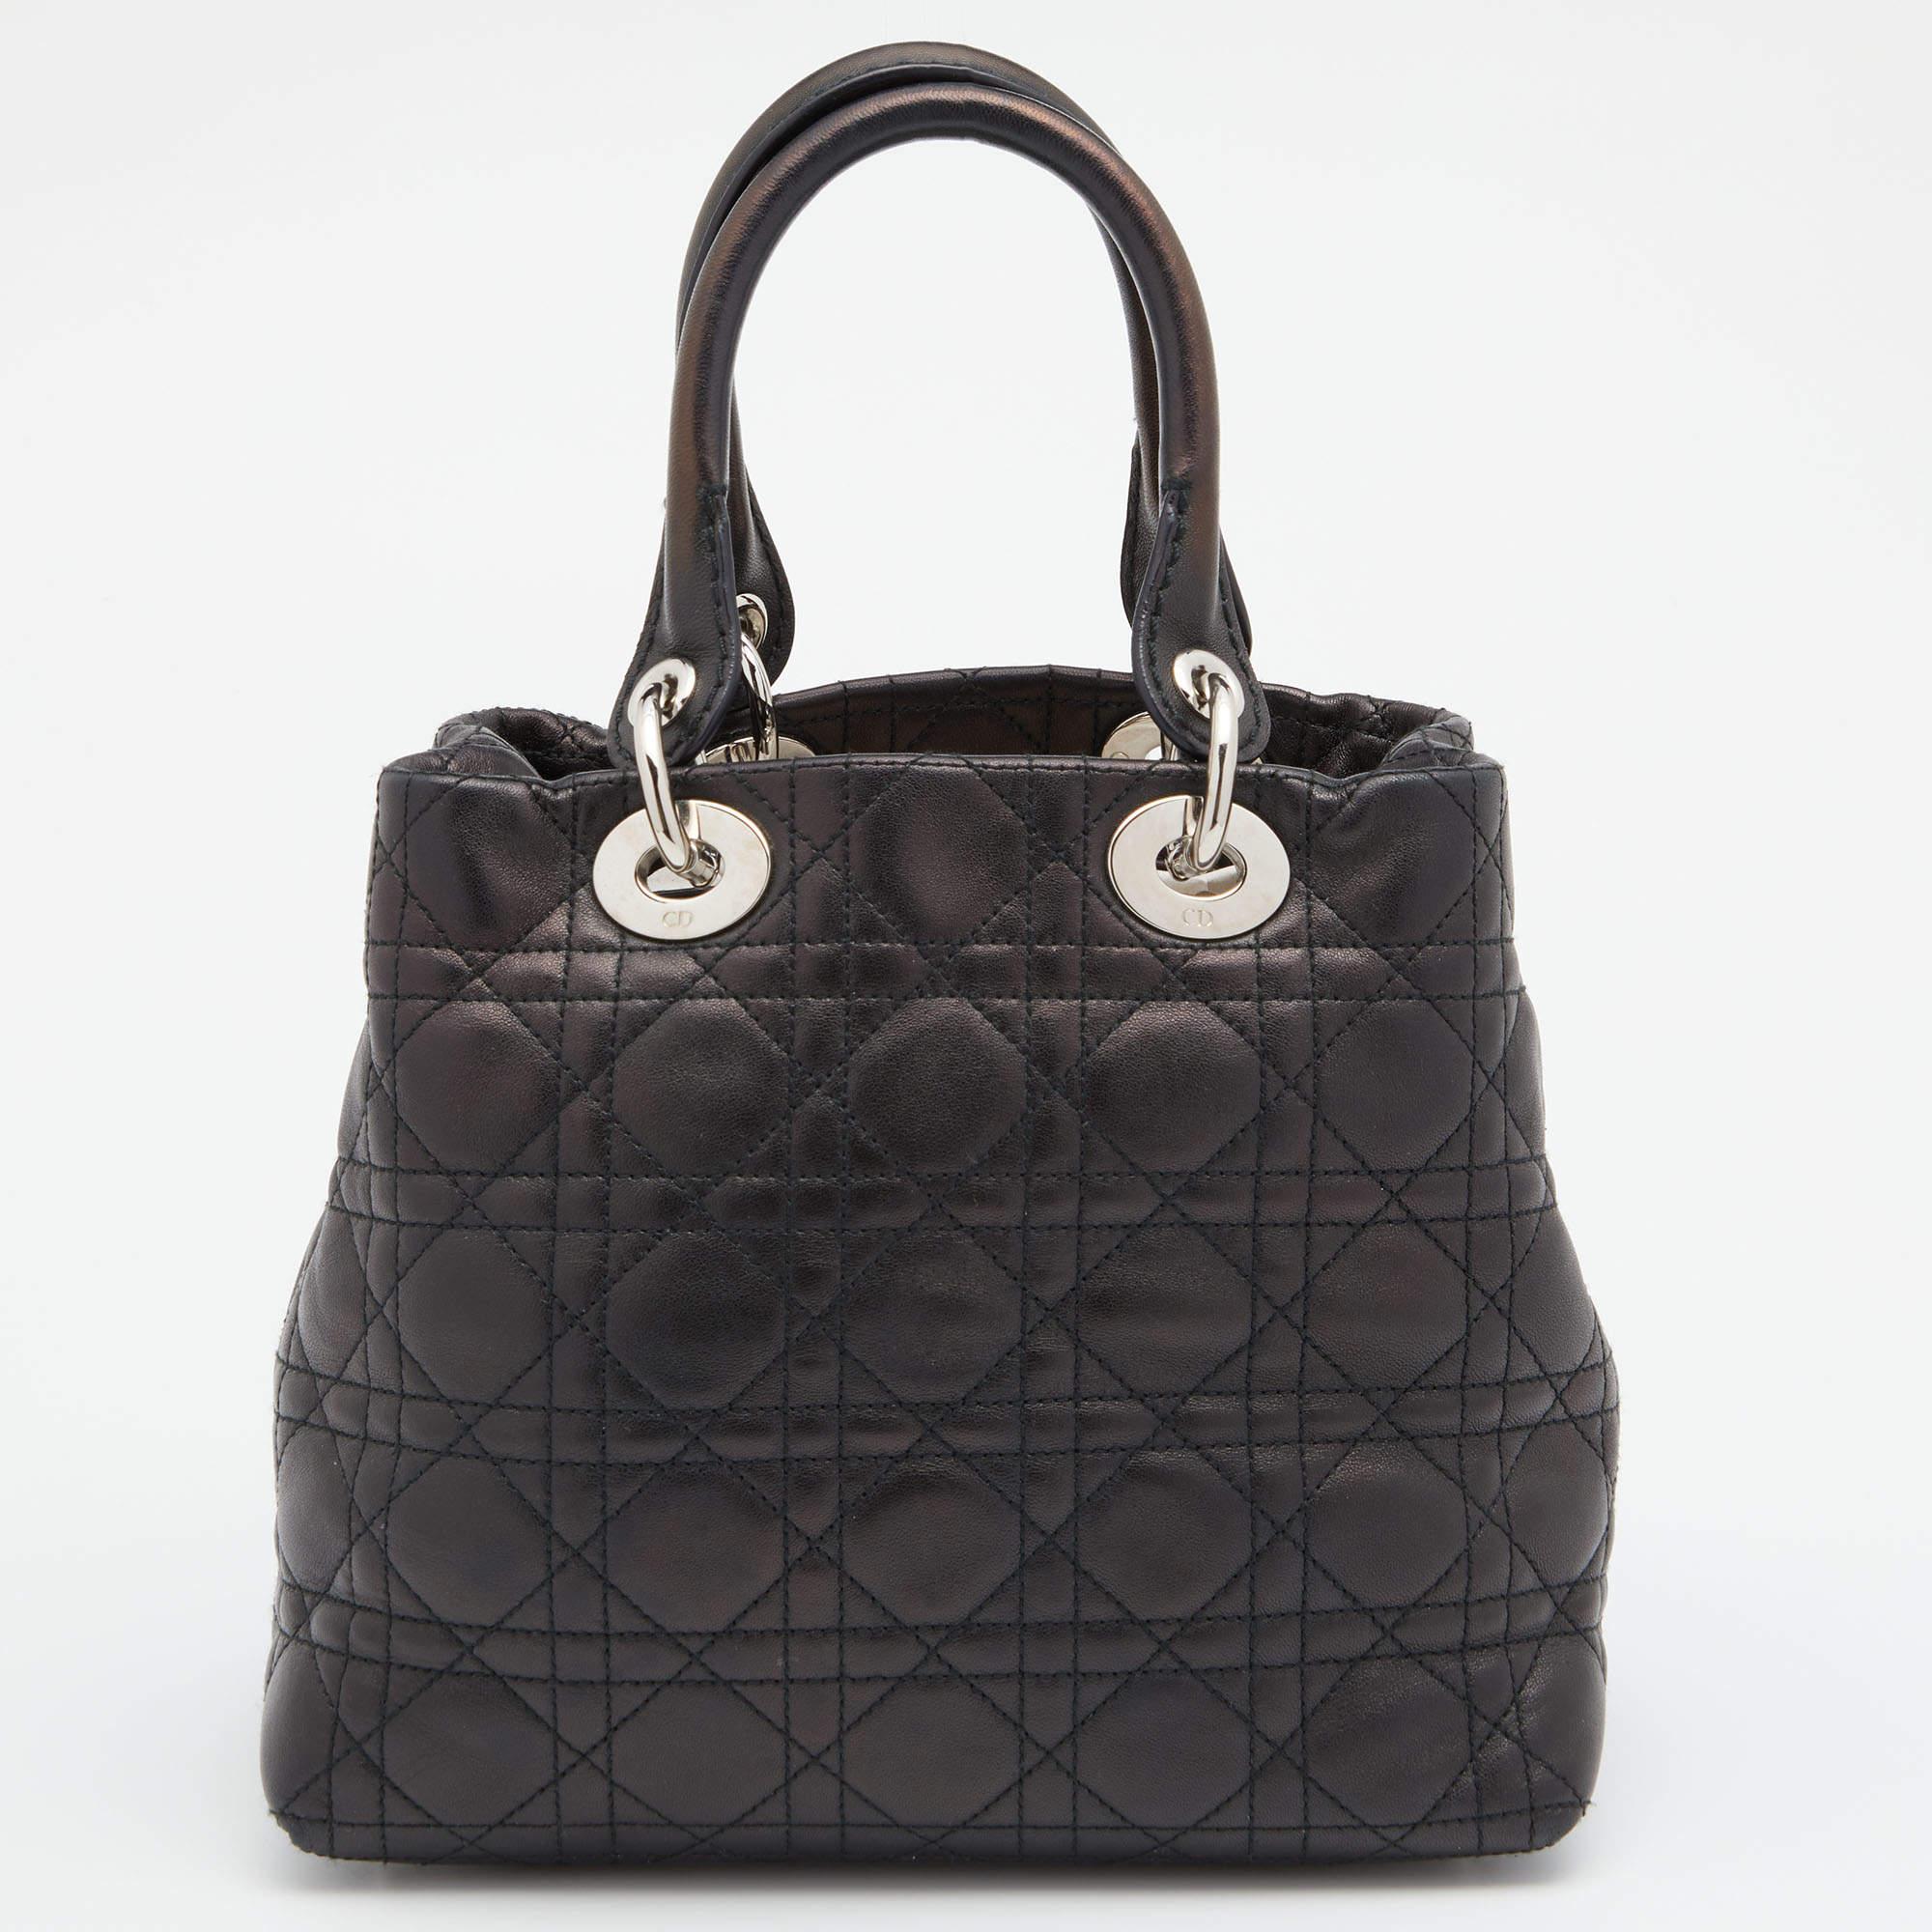 A timeless status and great design mark the Lady Dior tote. It is an iconic bag that people continue to invest in to this day. We have here this soft Lady Dior tote crafted from black Cannage leather in a relaxed style. The bag is complete with two